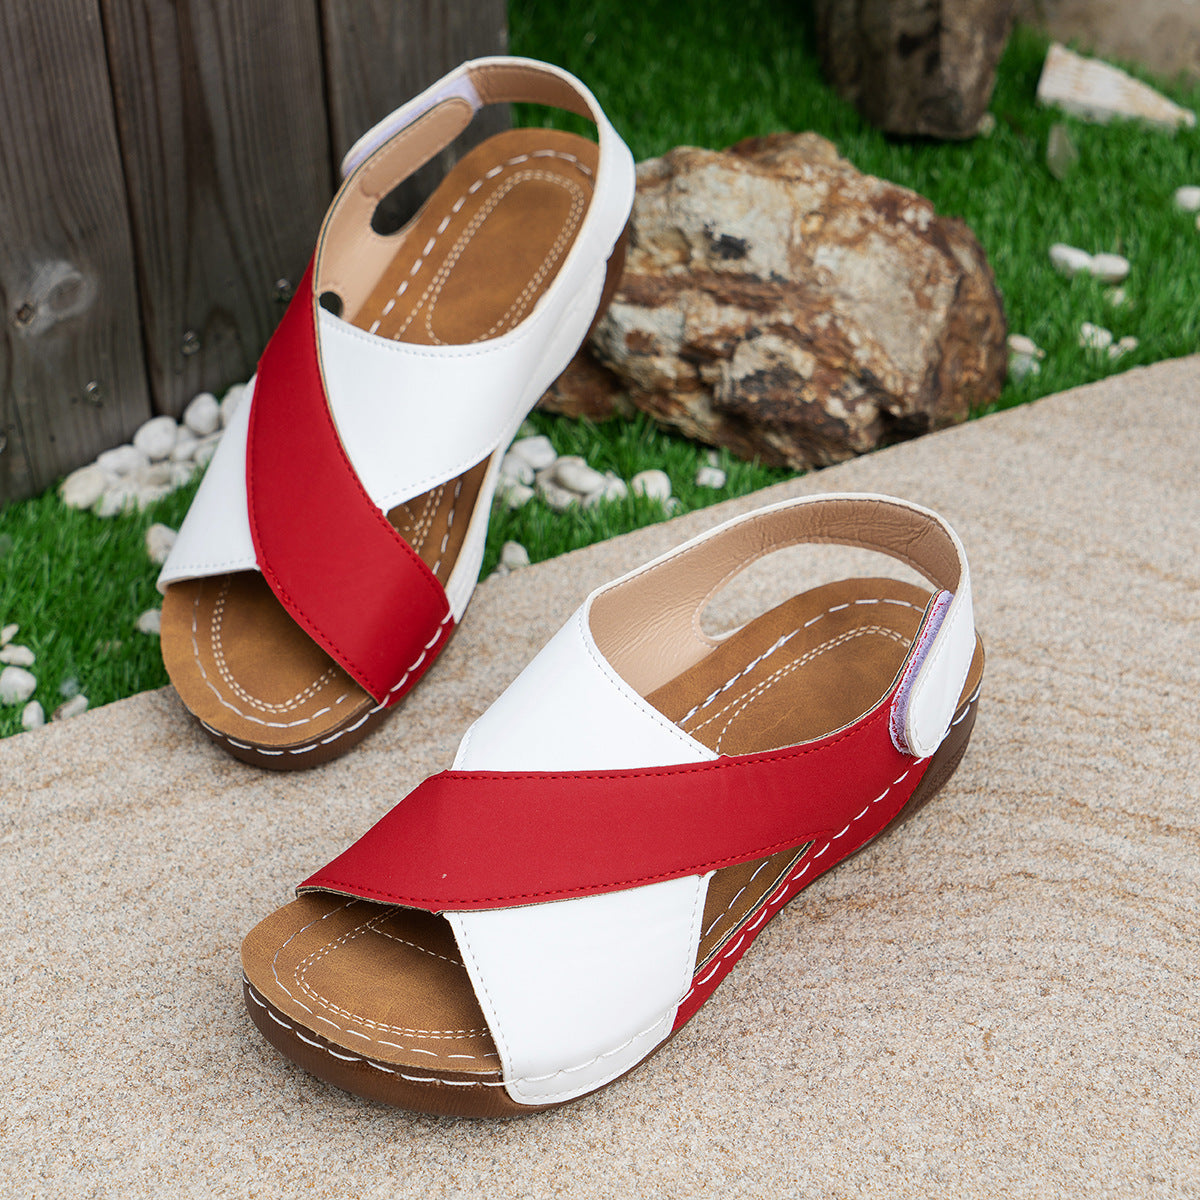 Summer Wedges Sandals With Colorblock Cross-strap Design Casual Thick-soled Roman Shoes For Women